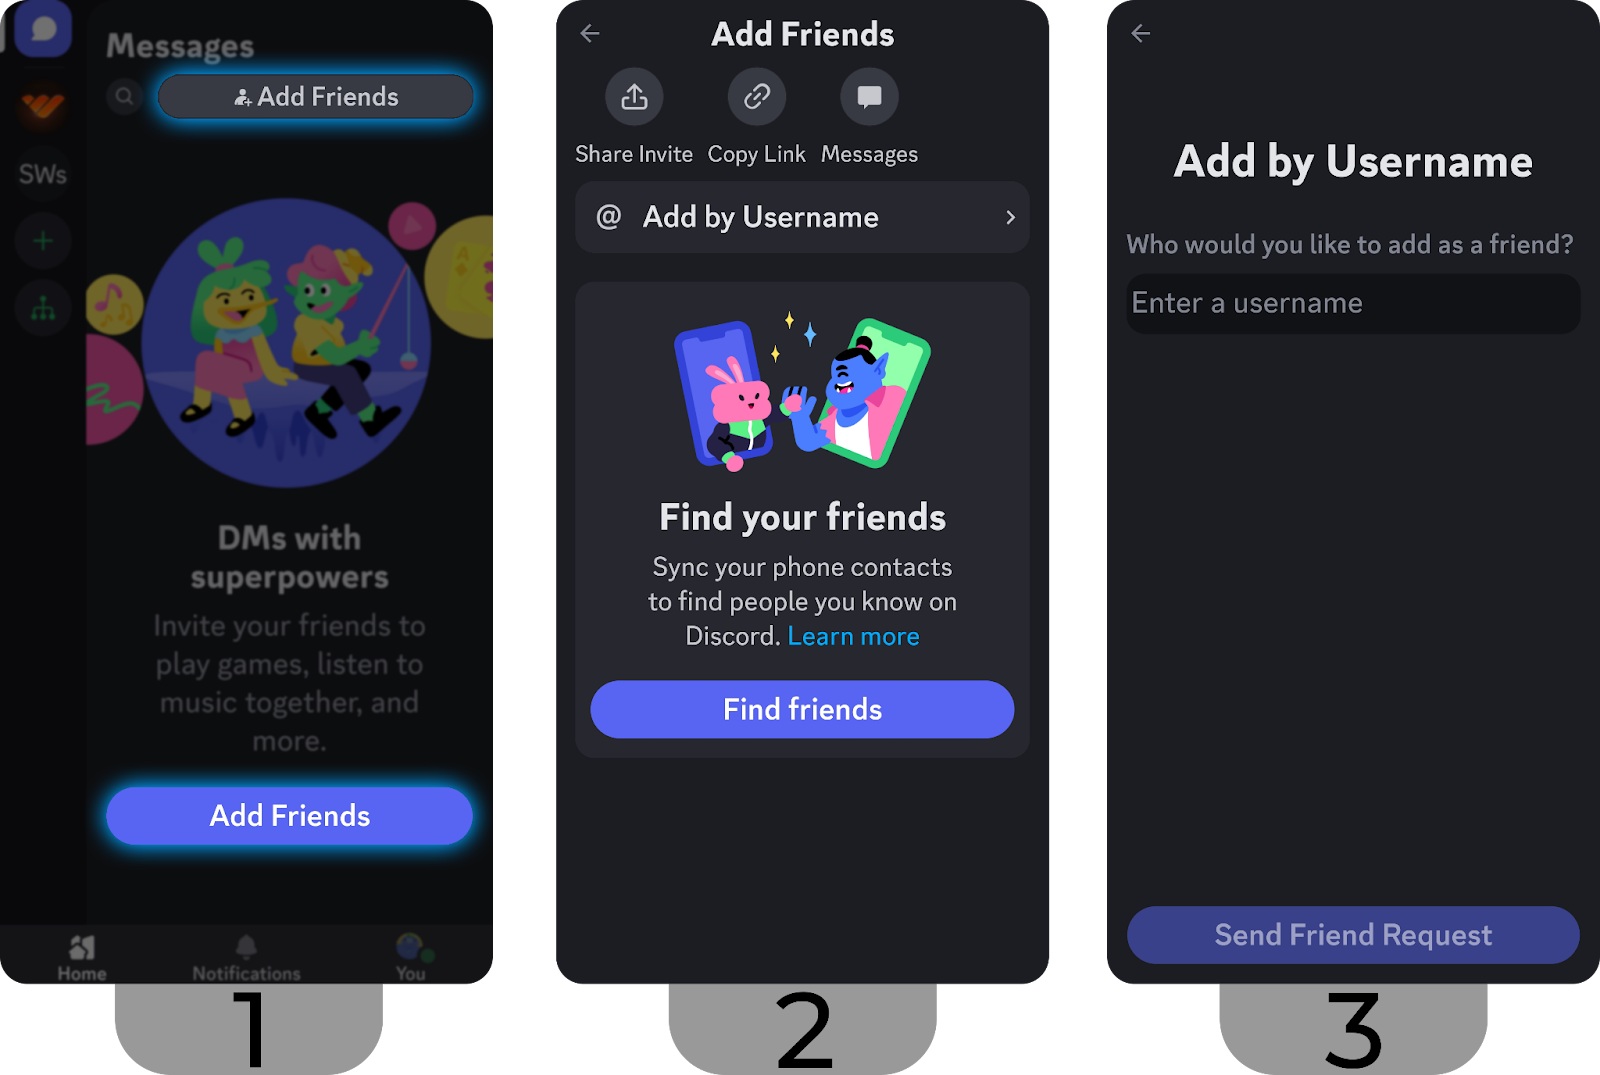 Steps to send a Discord user a friend request on mobile using their username